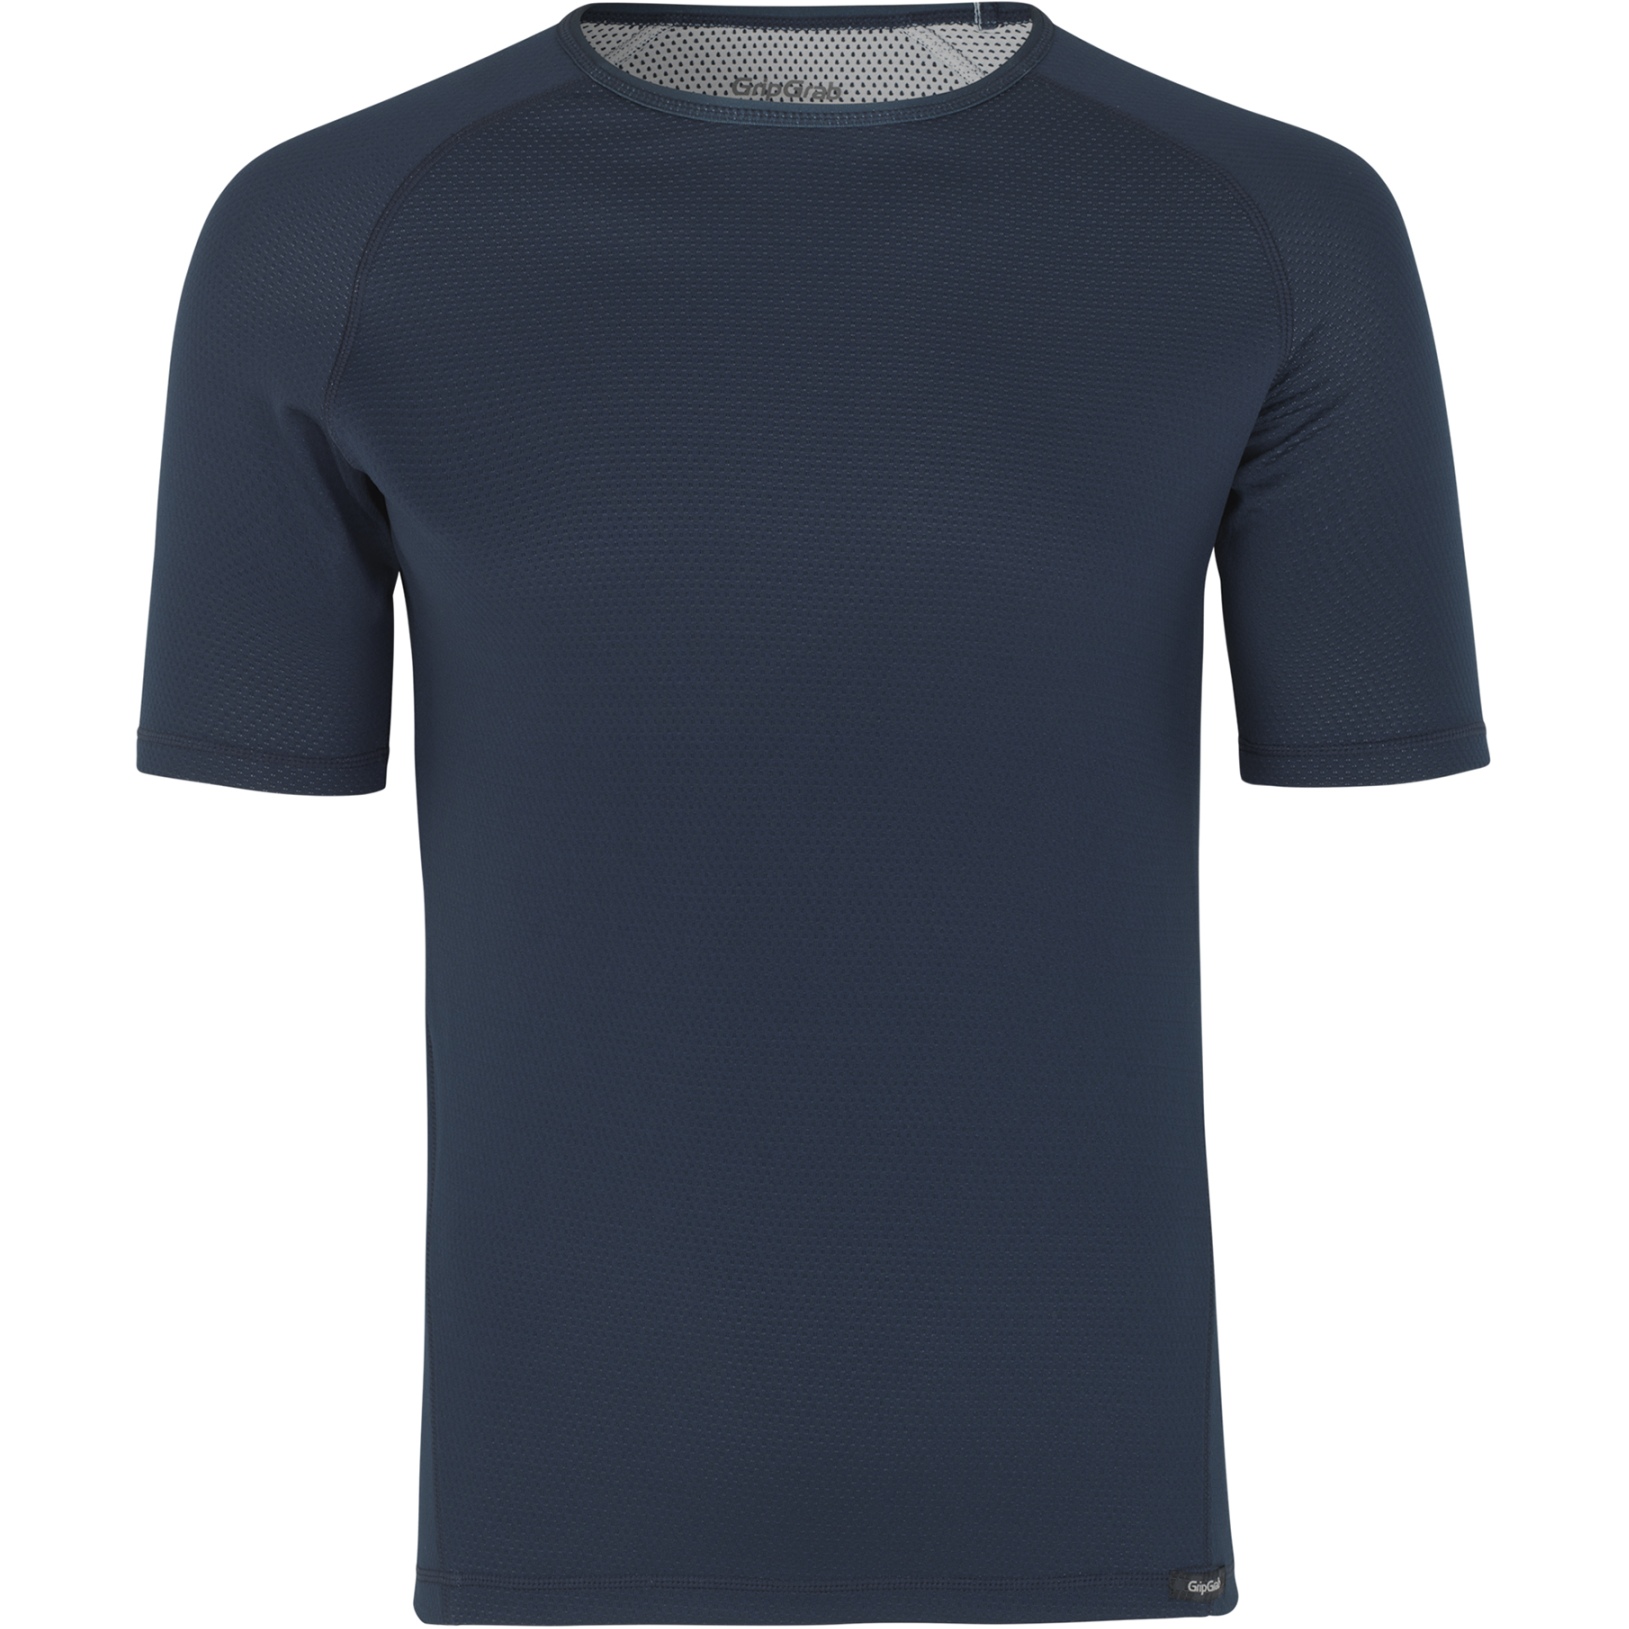 Image of GripGrab Ride Thermal Short Sleeve Base Layer - Navy Blue